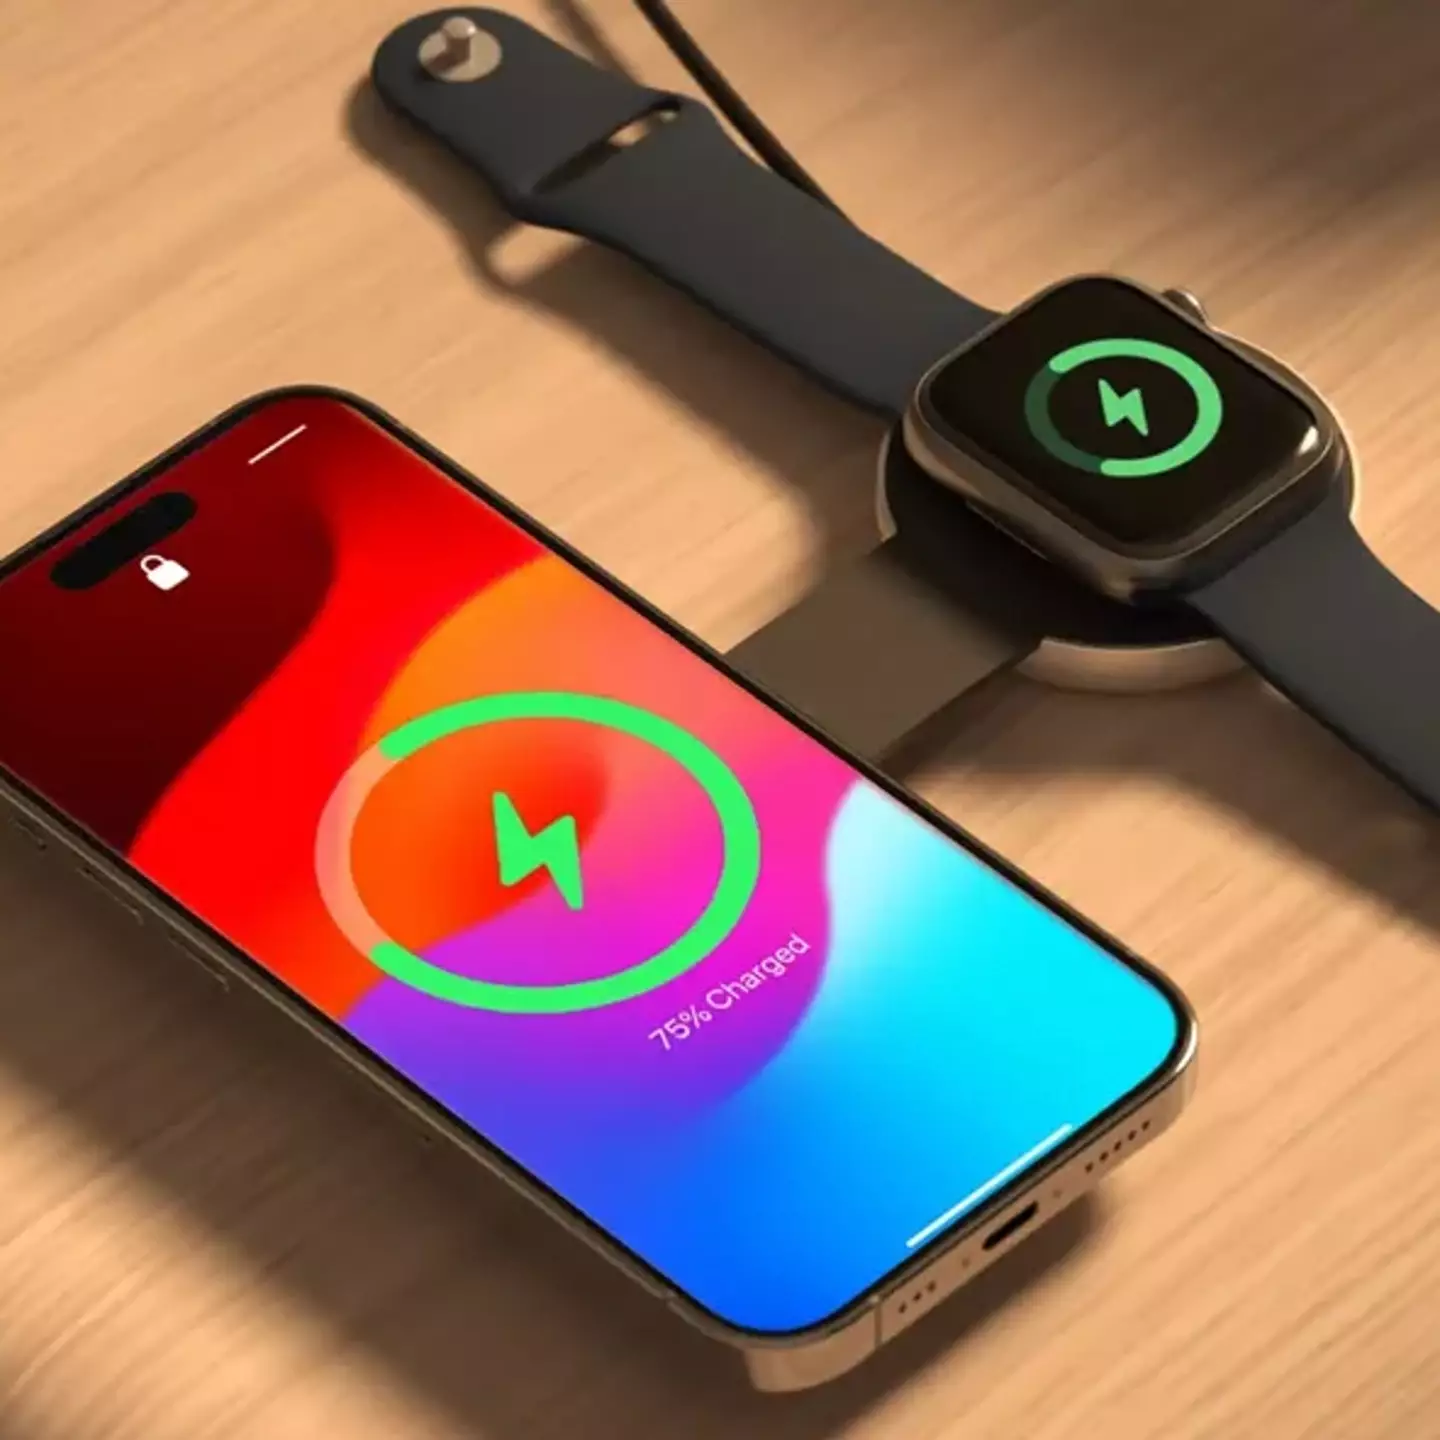 'World’s smallest’ dual charger that can charge your iPhone and Apple Watch together is perfect for your travels